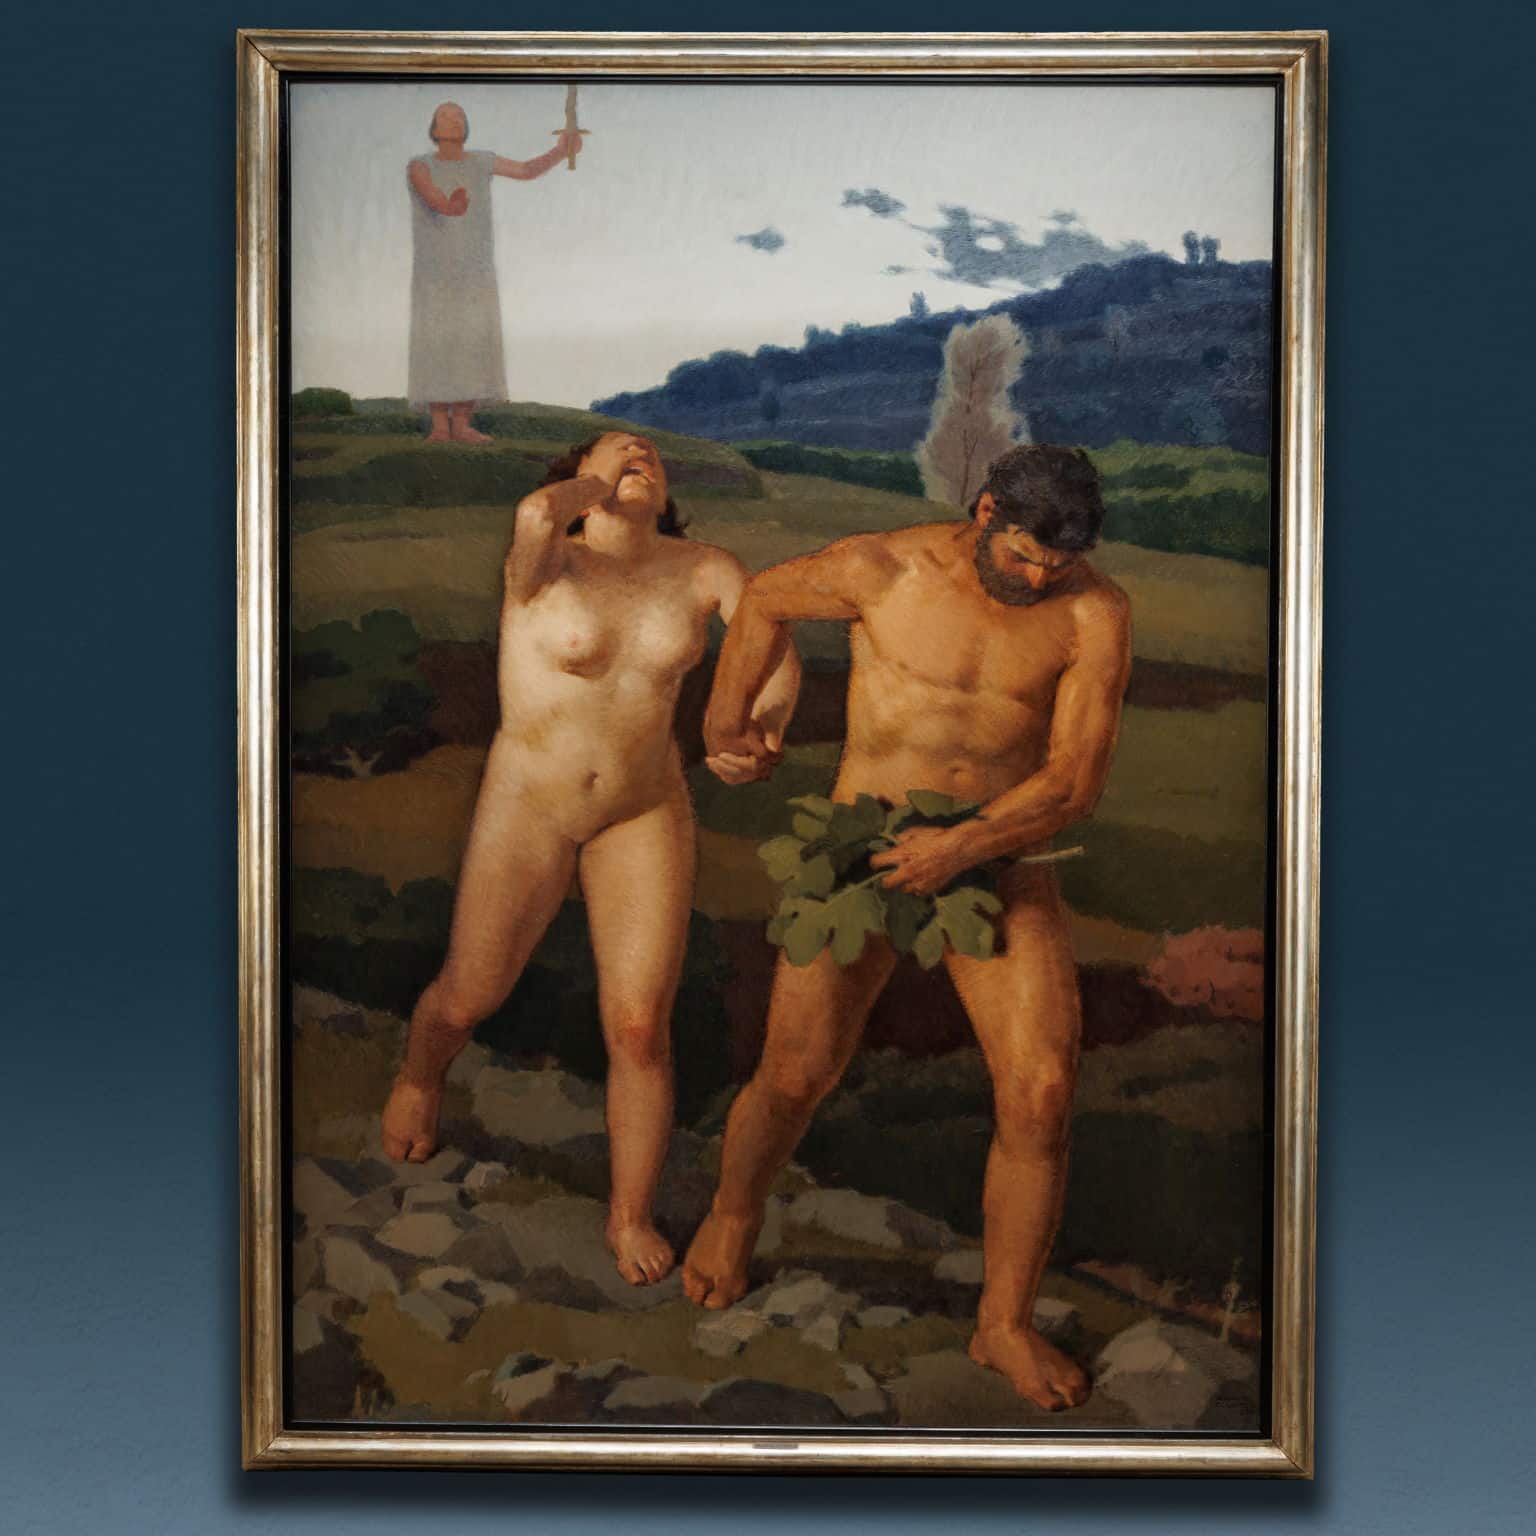 The Expulsion of Adam and Eve. Augusto Columbo. Oil painting on canvas